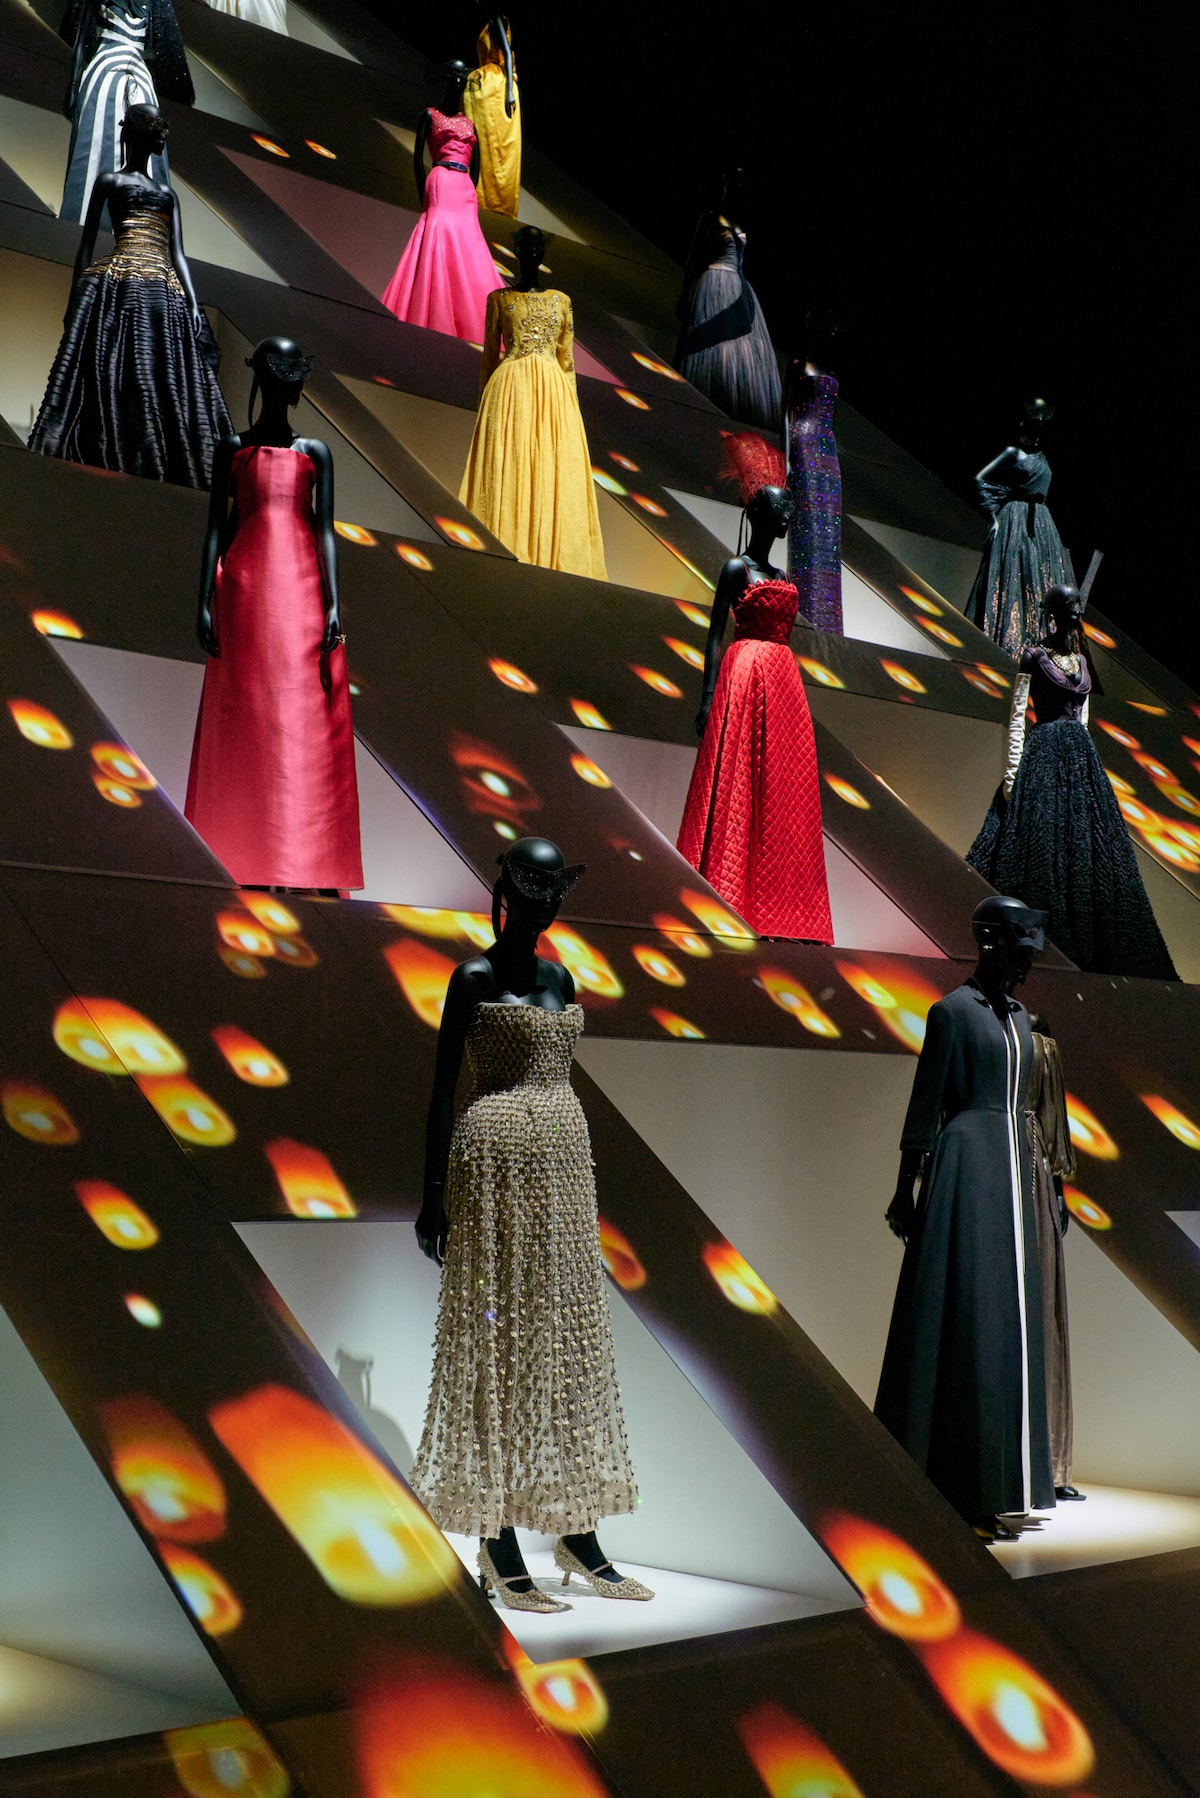 Dior Exhibition at Museum of Contemporary Art Tokyo